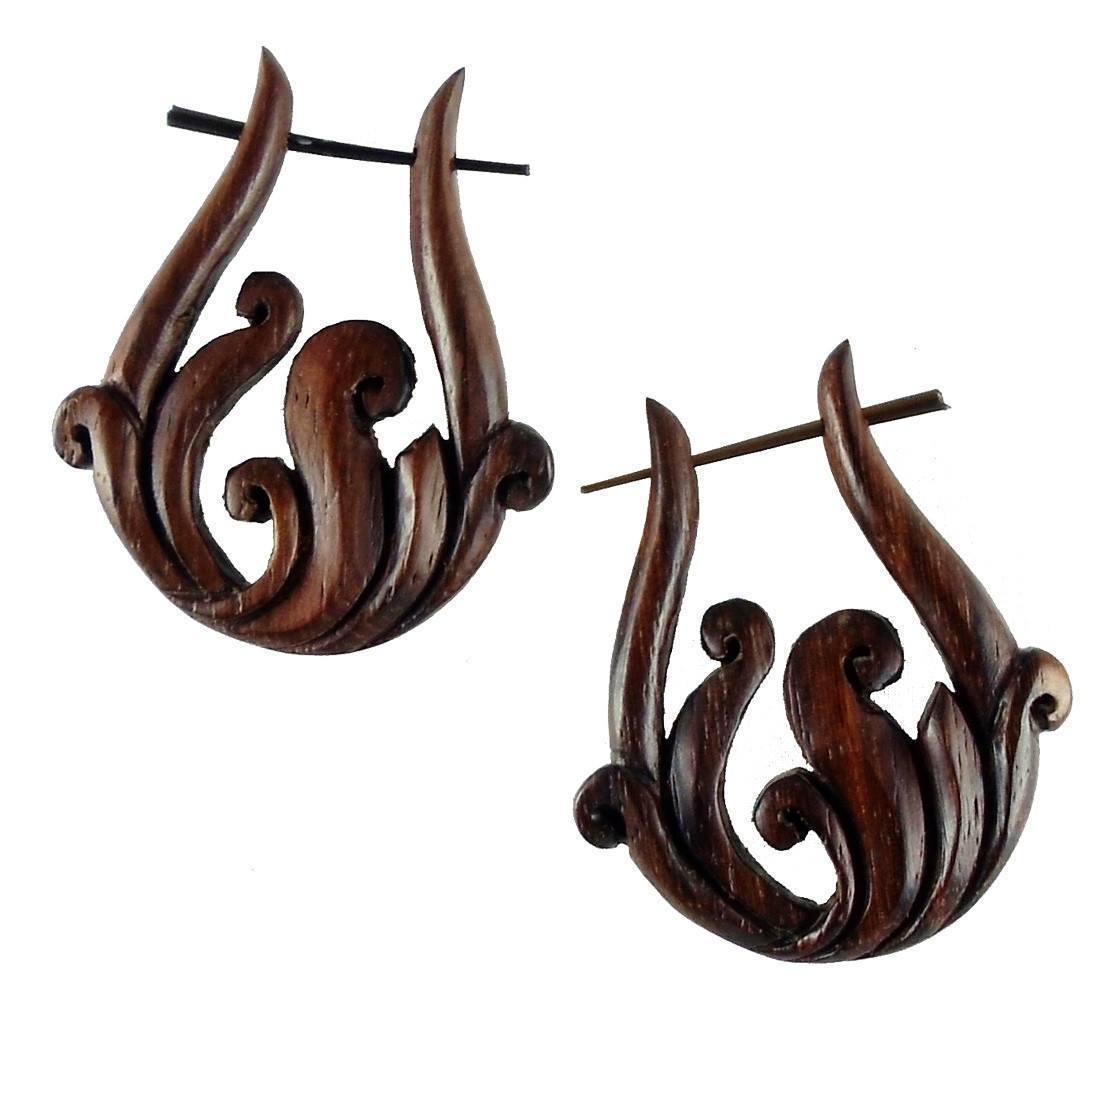 Natural Jewelry :|: Spring Vine. Wooden Earrings, Rosewood. 1 1/4 inch W x 1 3/4 inch L. | Wood Earrings